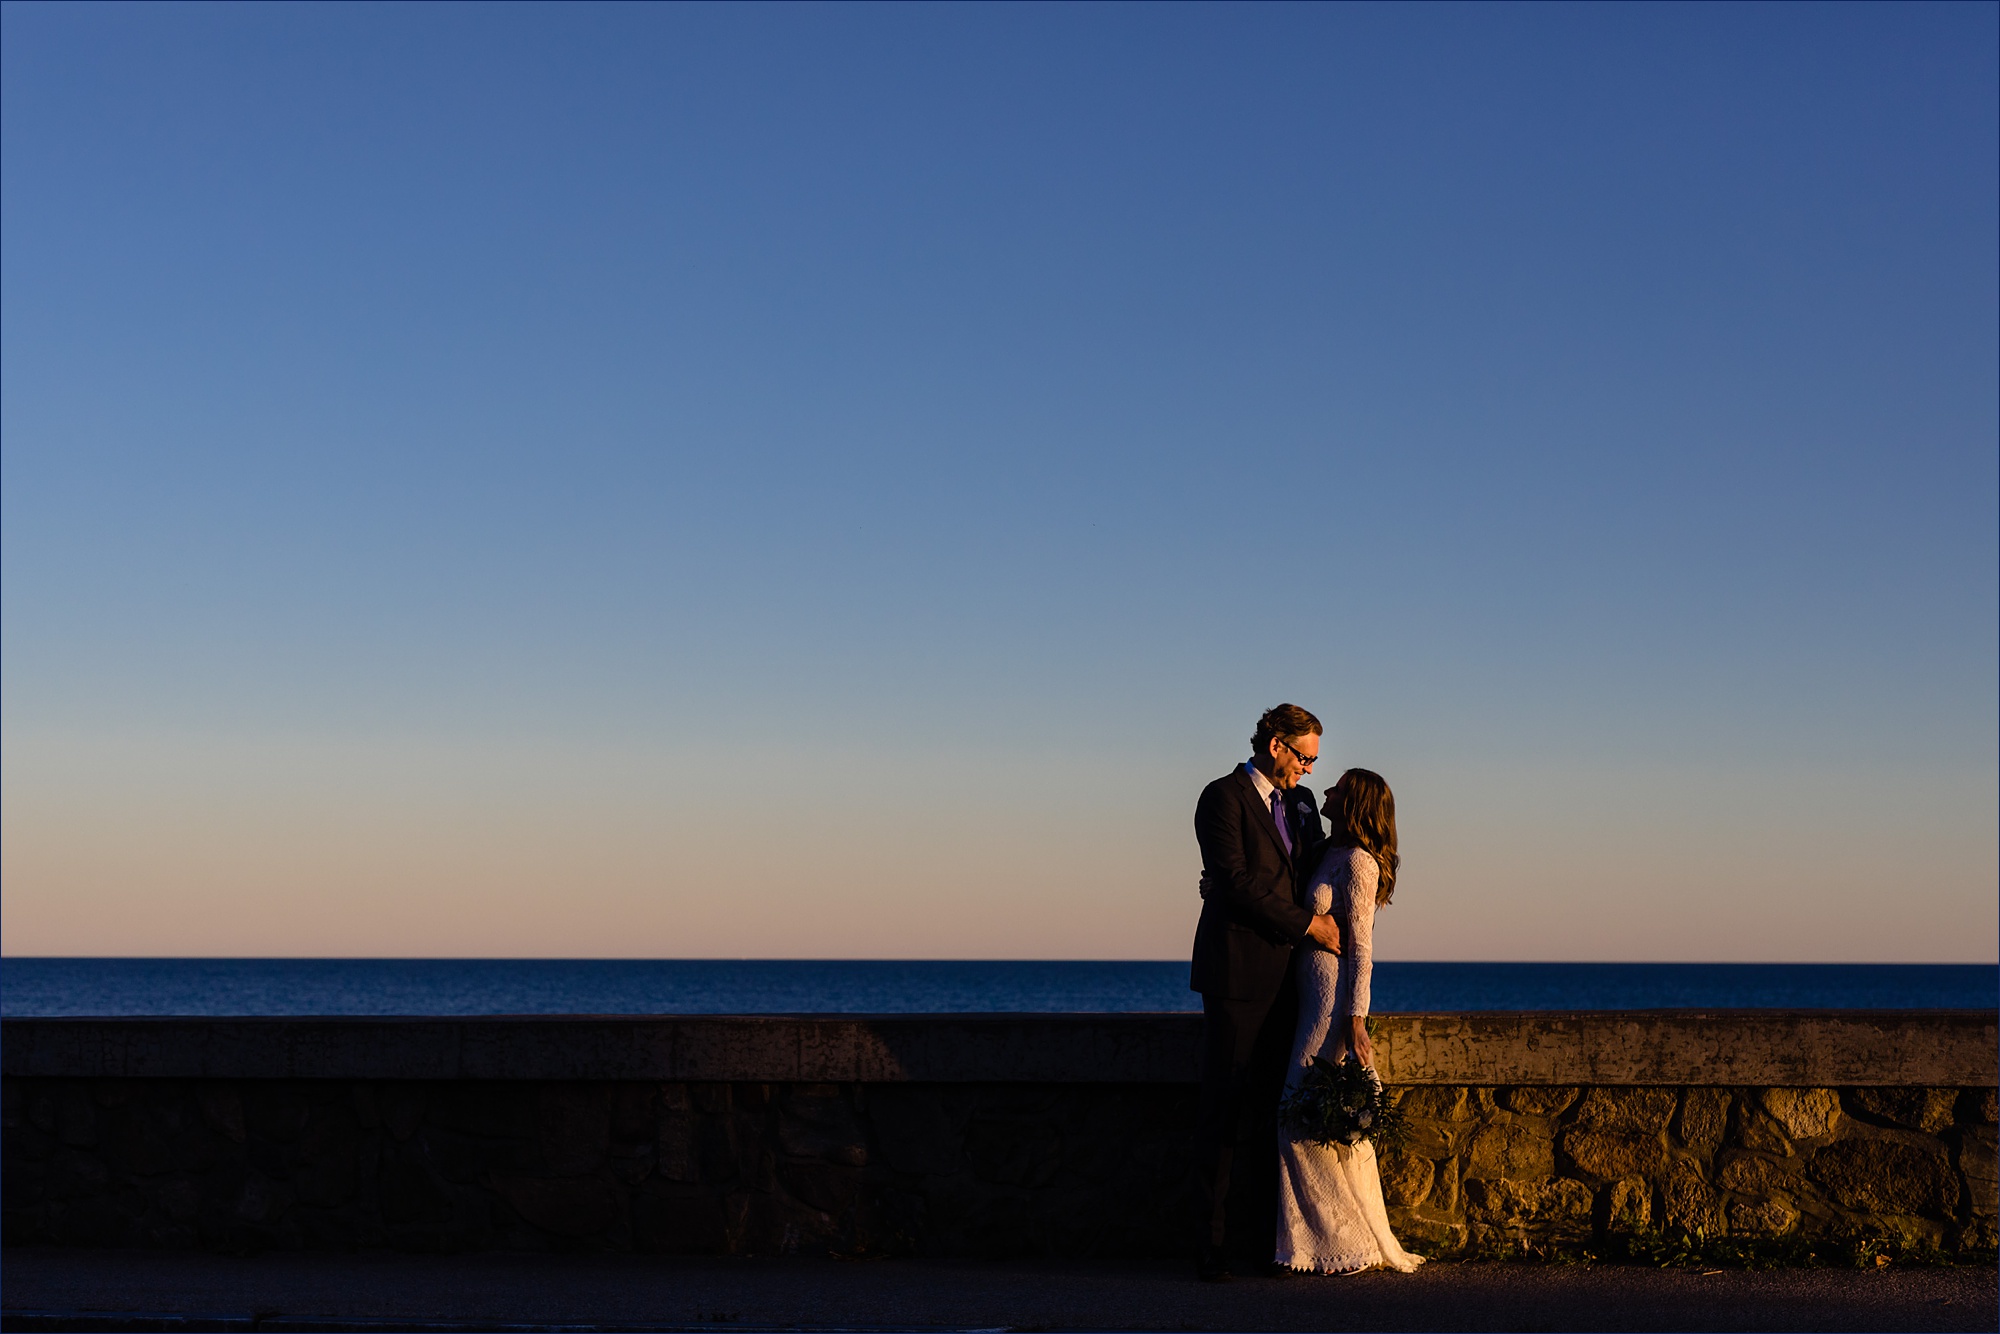 The bride and groom stand in front of the ocean as the sun sets behind them in Kennebunkport Maine